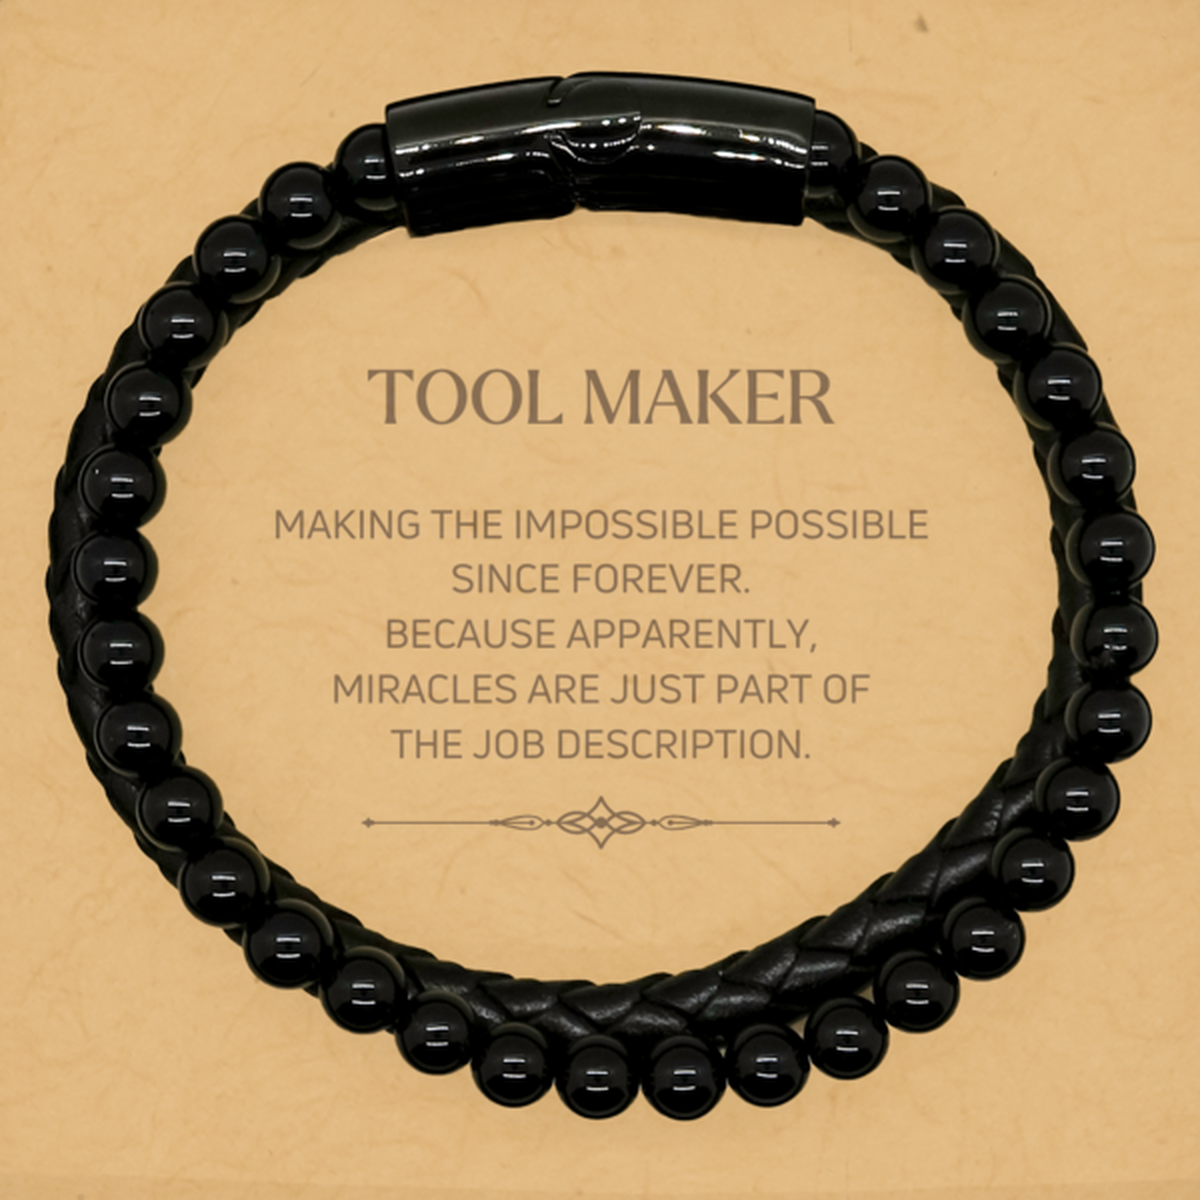 Funny Tool Maker Gifts, Miracles are just part of the job description, Inspirational Birthday Stone Leather Bracelets For Tool Maker, Men, Women, Coworkers, Friends, Boss